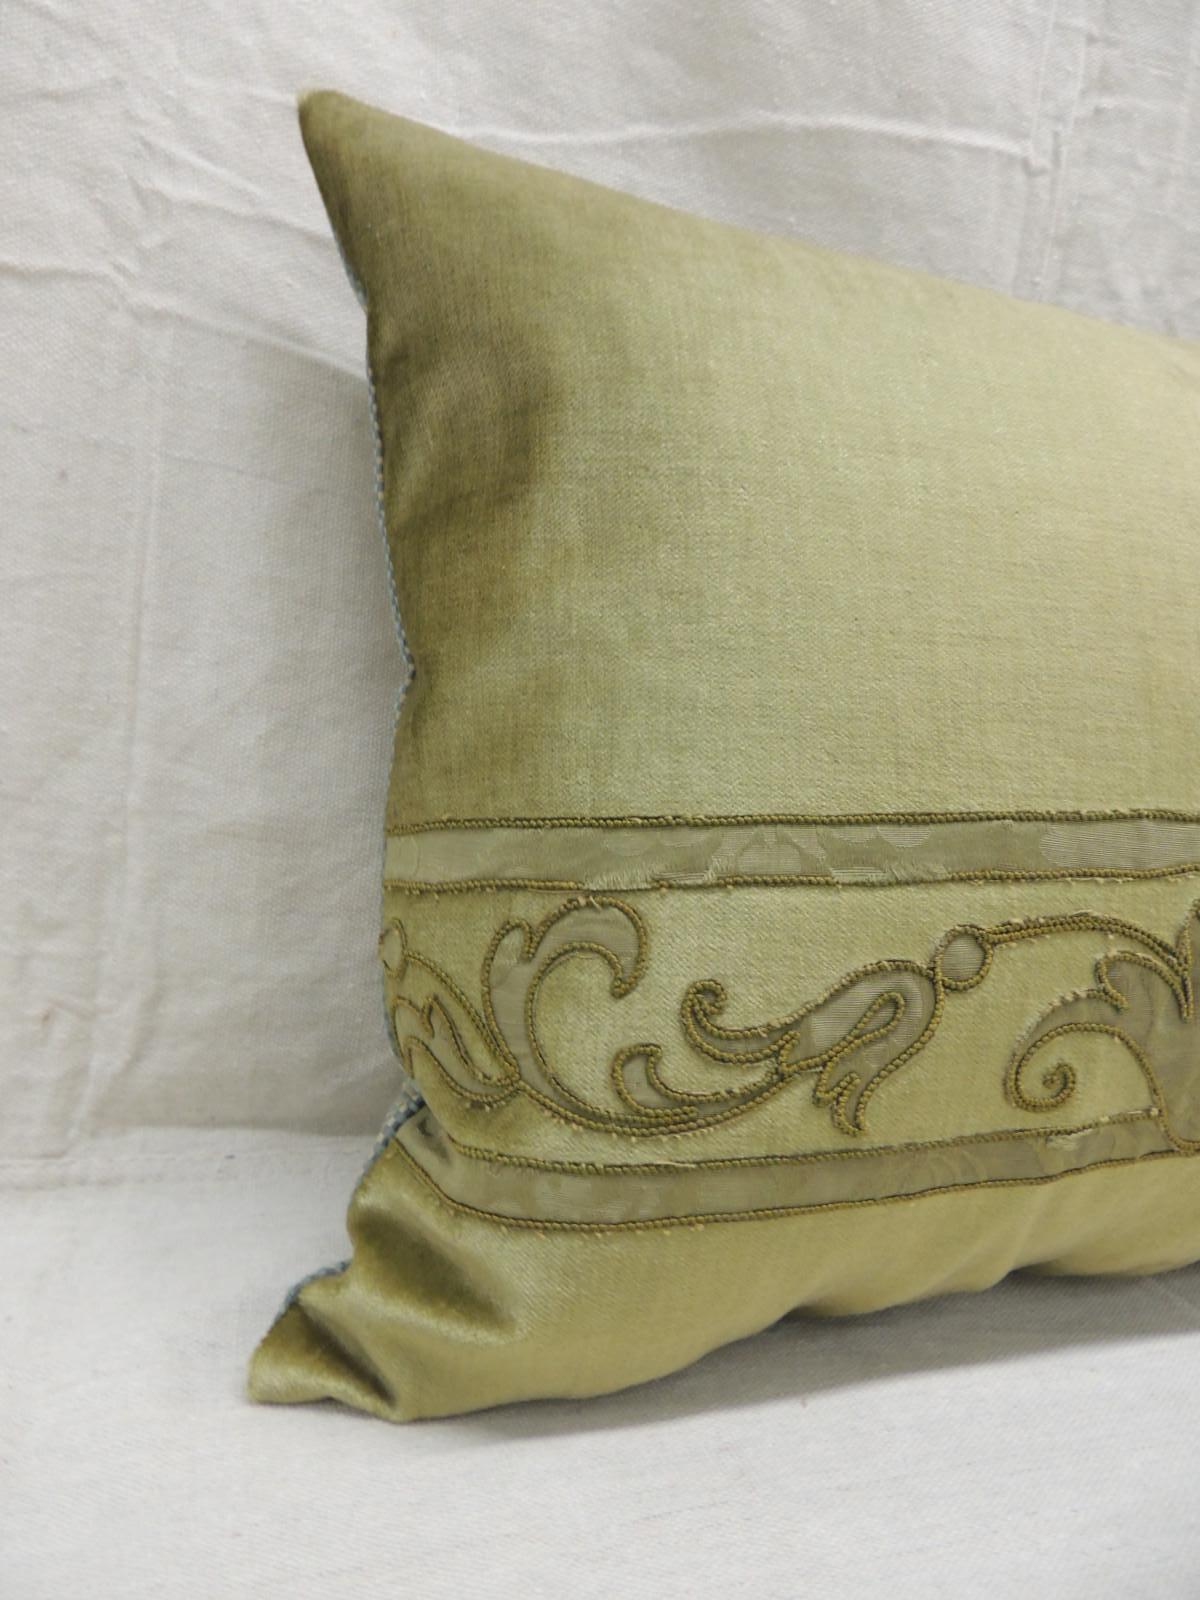 Antique silk velvet olive green applique decorative bolster pillow.
Silk brocade embroidered green silk threads and applied onto silk velvet.
(New) small check green and gold pattern was used on backings.
This textile was originally a table